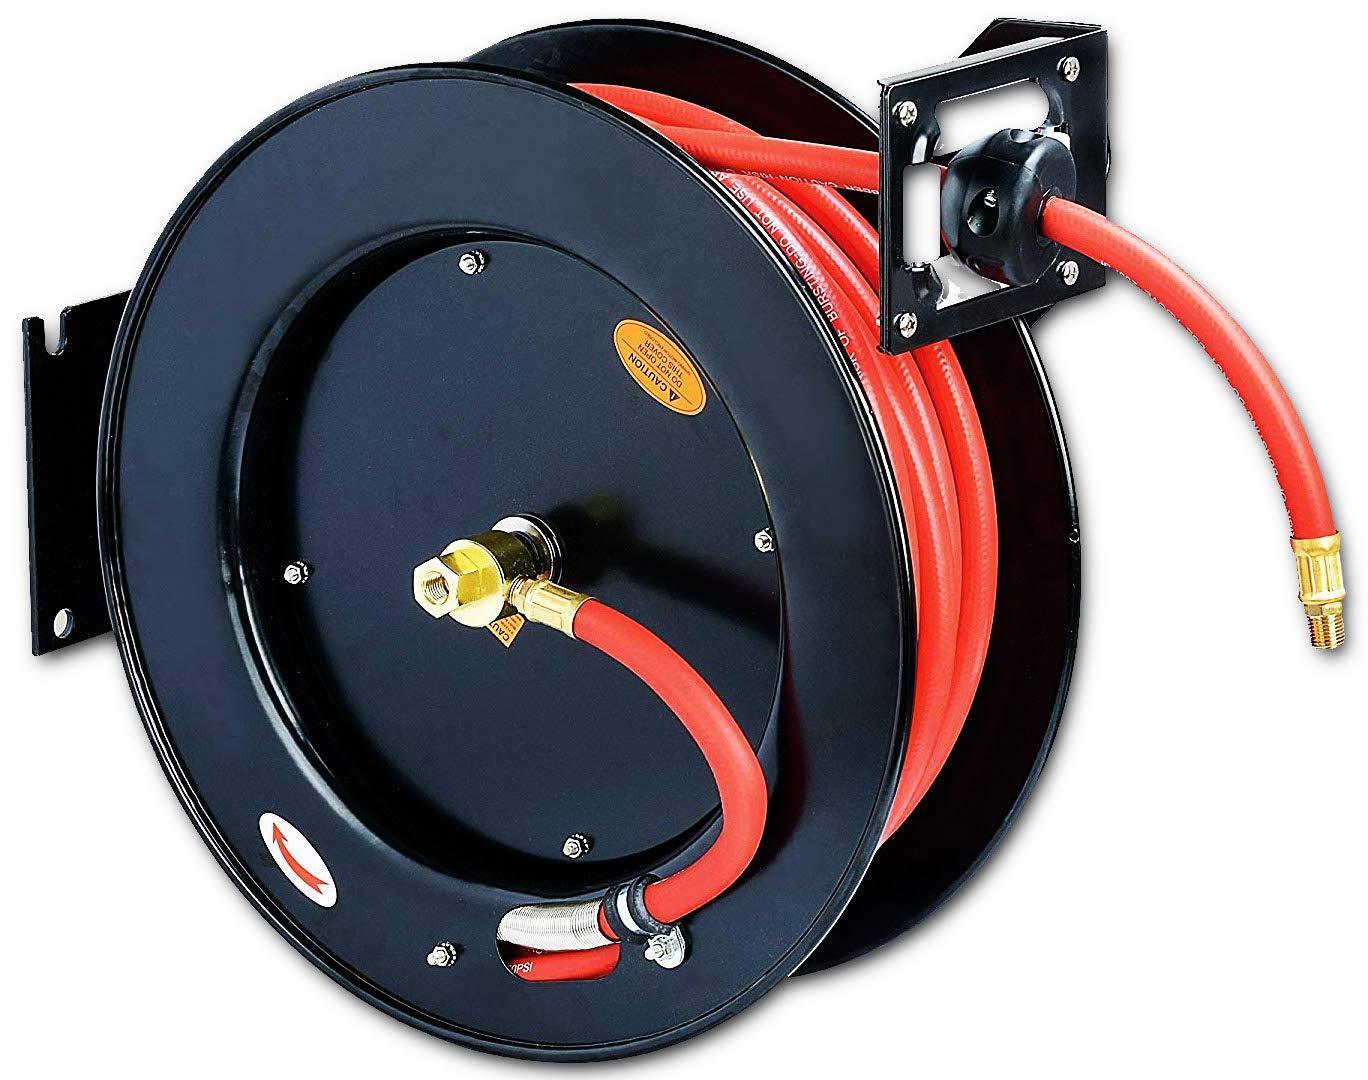 ReelWorks Industrial Retractable Air Hose Reel - 3/8" x  50'FT, 1/4" MNPT Connections, Single Arm - DIY Tools by GreatCircleUS